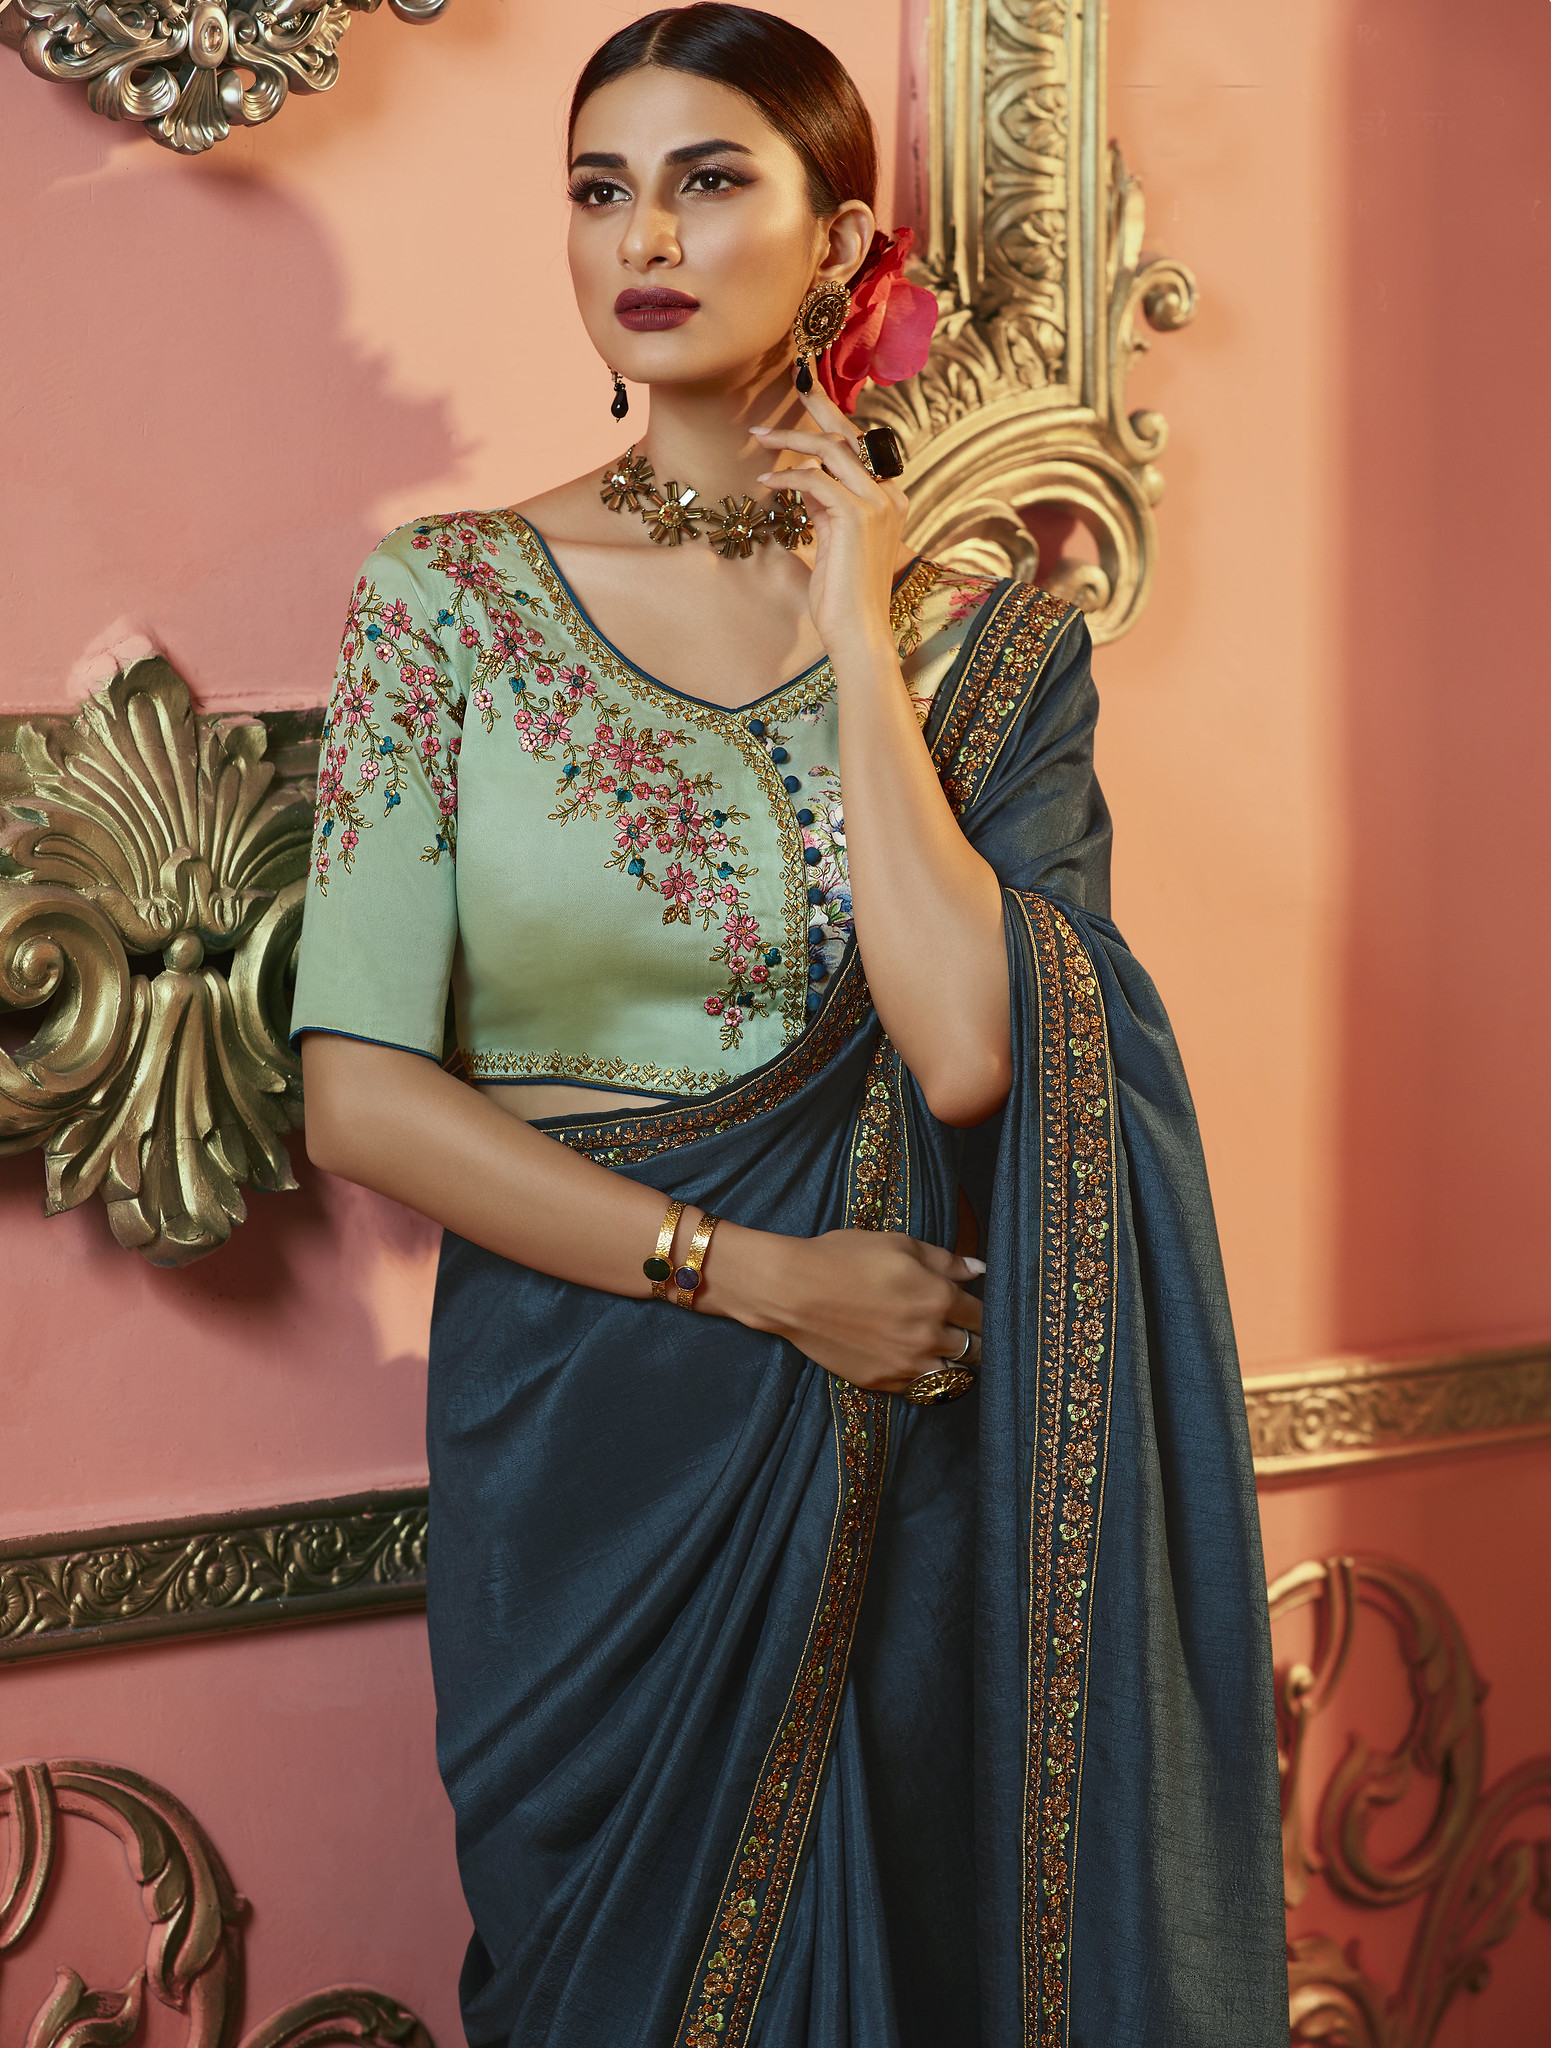 Dola Silk Saree Plain and Emboirdered Lace Border with Embroidered ...